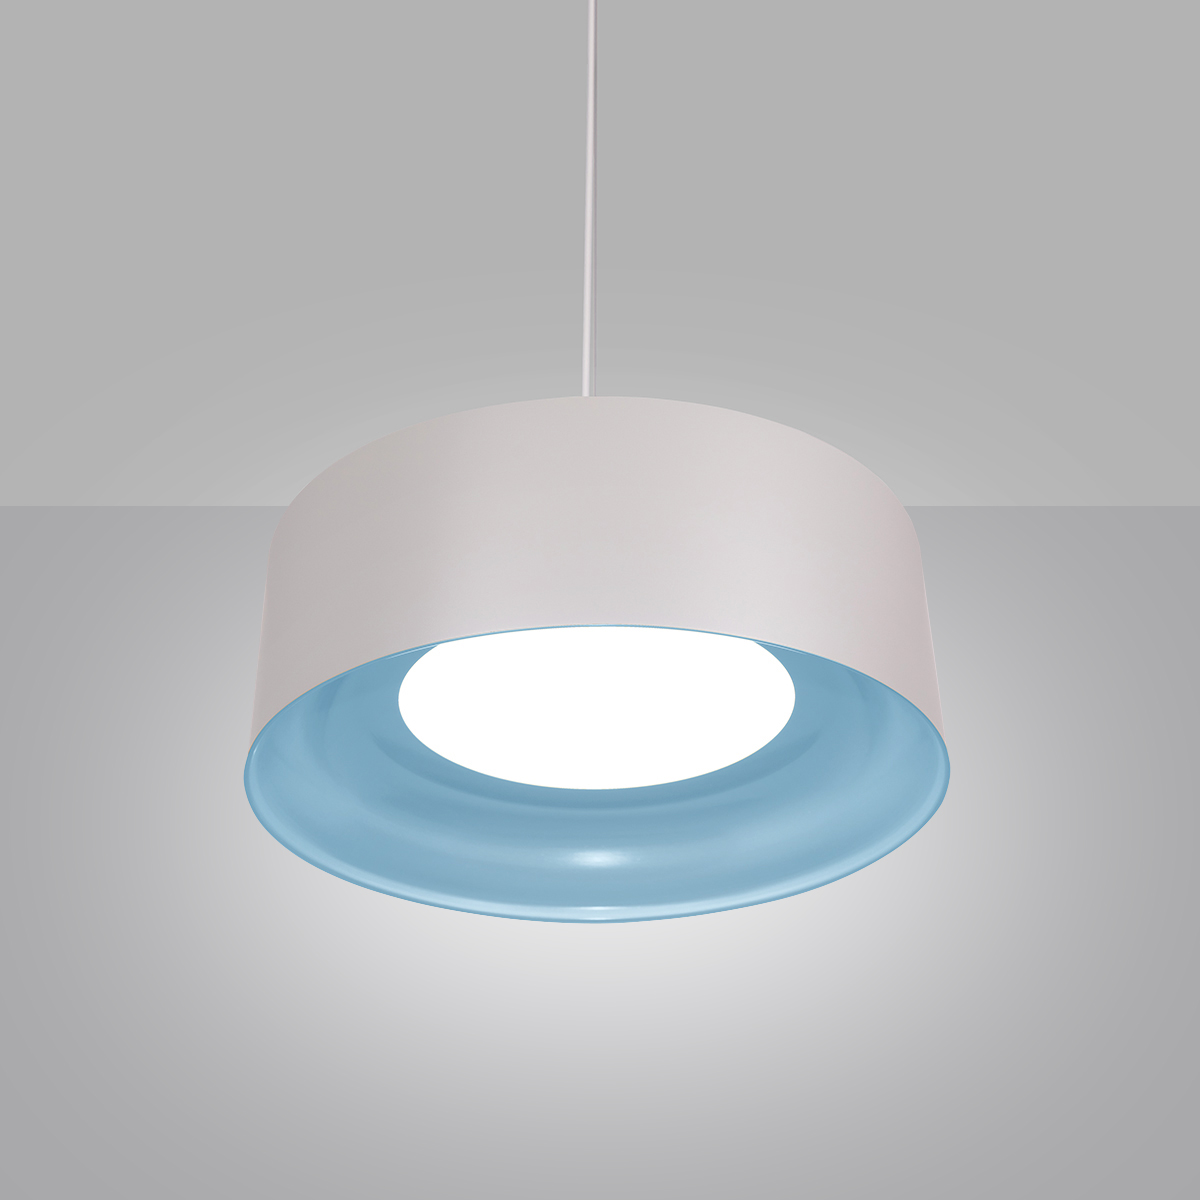 Drum ceiling light with LEDs and blue interior finish